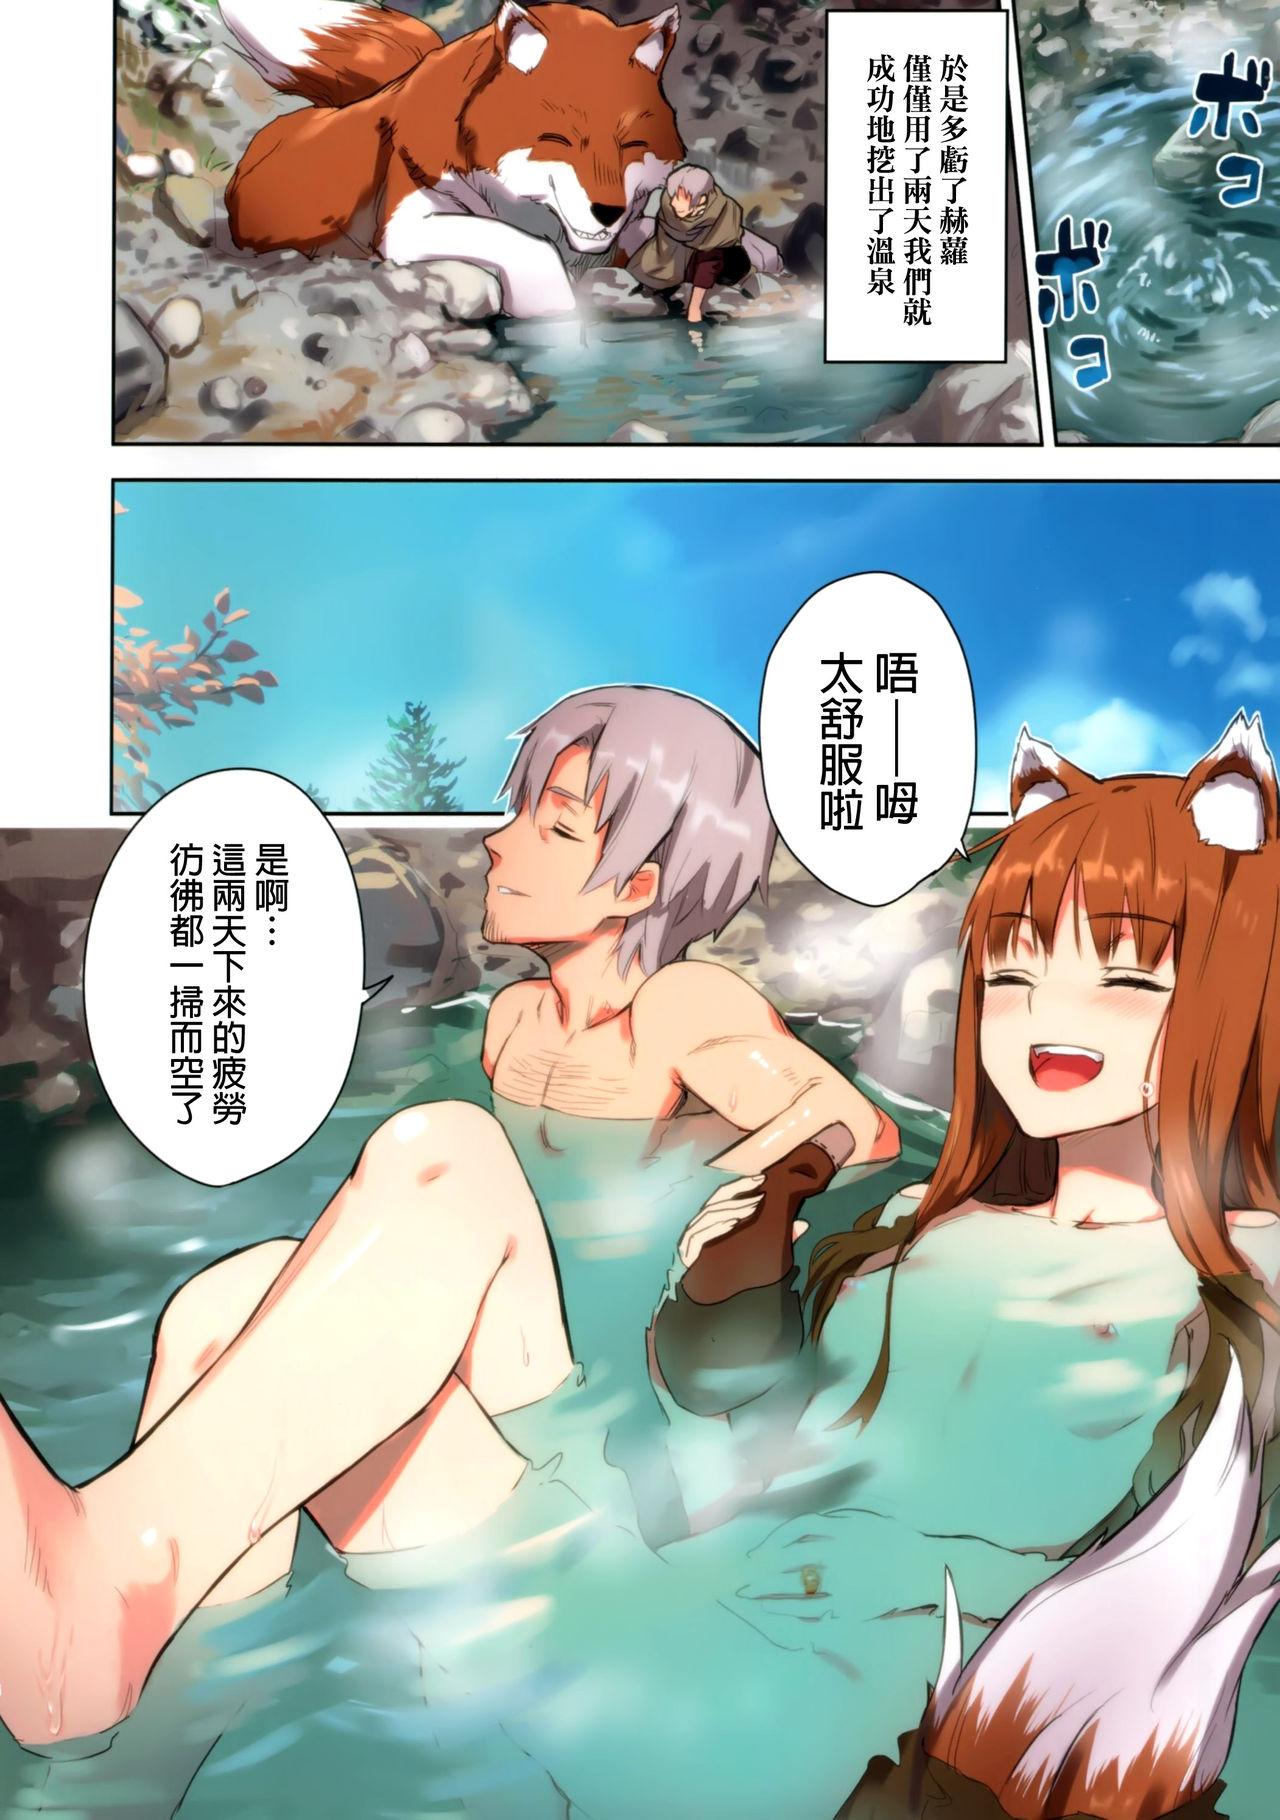 Whatsapp Wacchi to Nyohhira Bon FULL COLOR - Spice and wolf Hardsex - Page 7